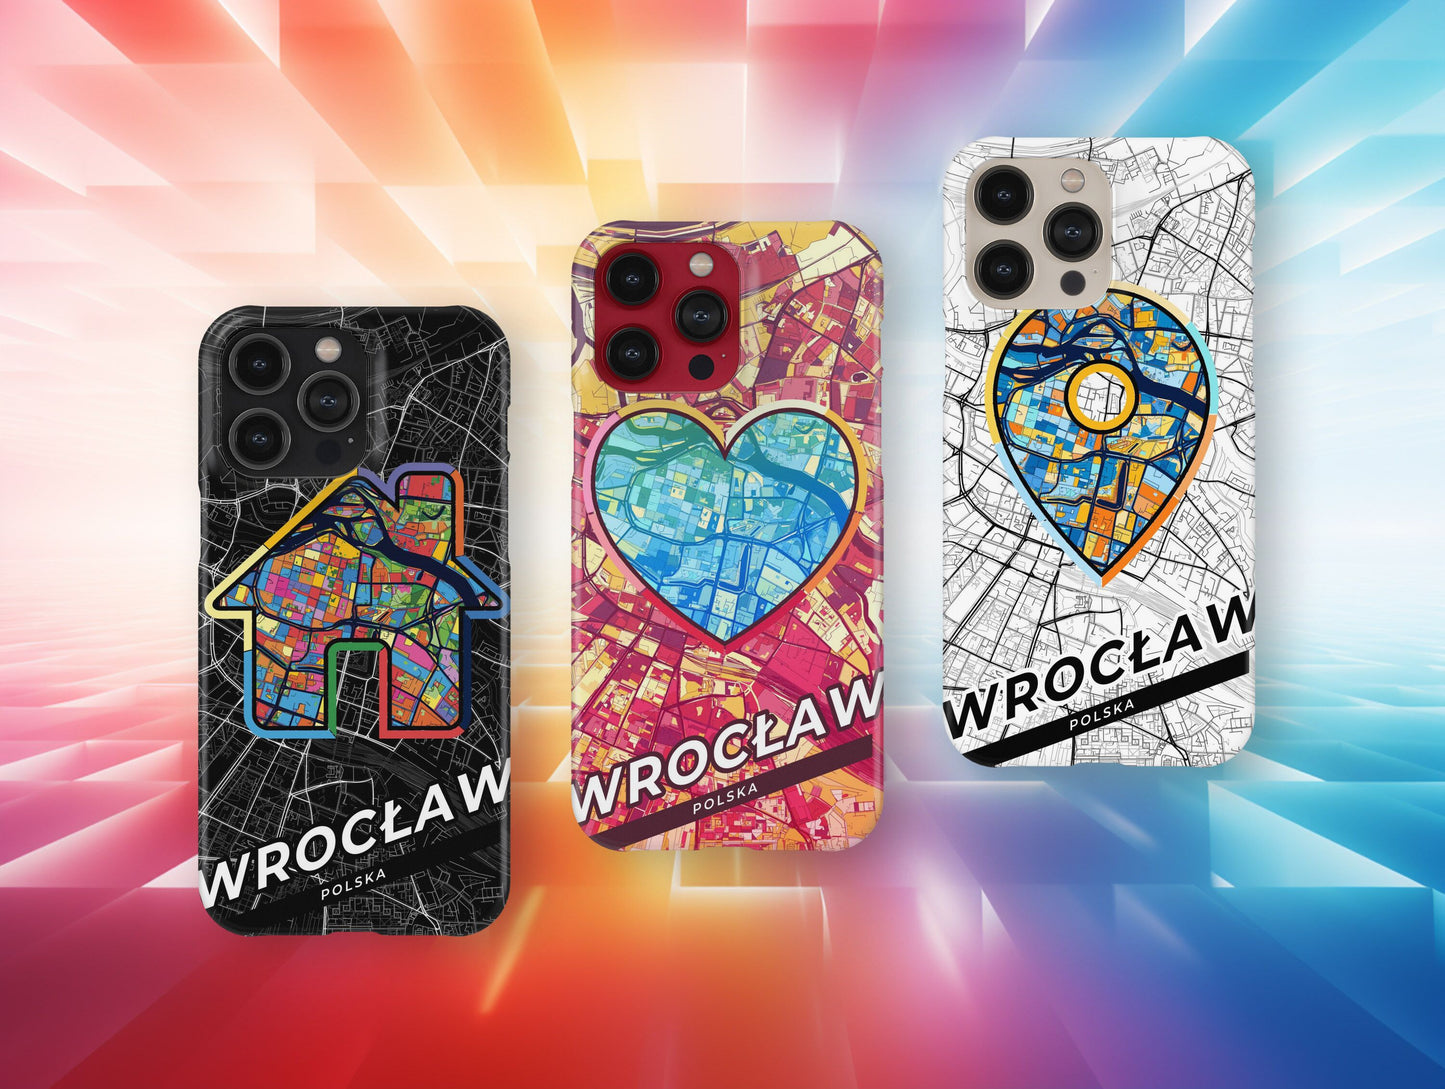 Wrocław Poland slim phone case with colorful icon